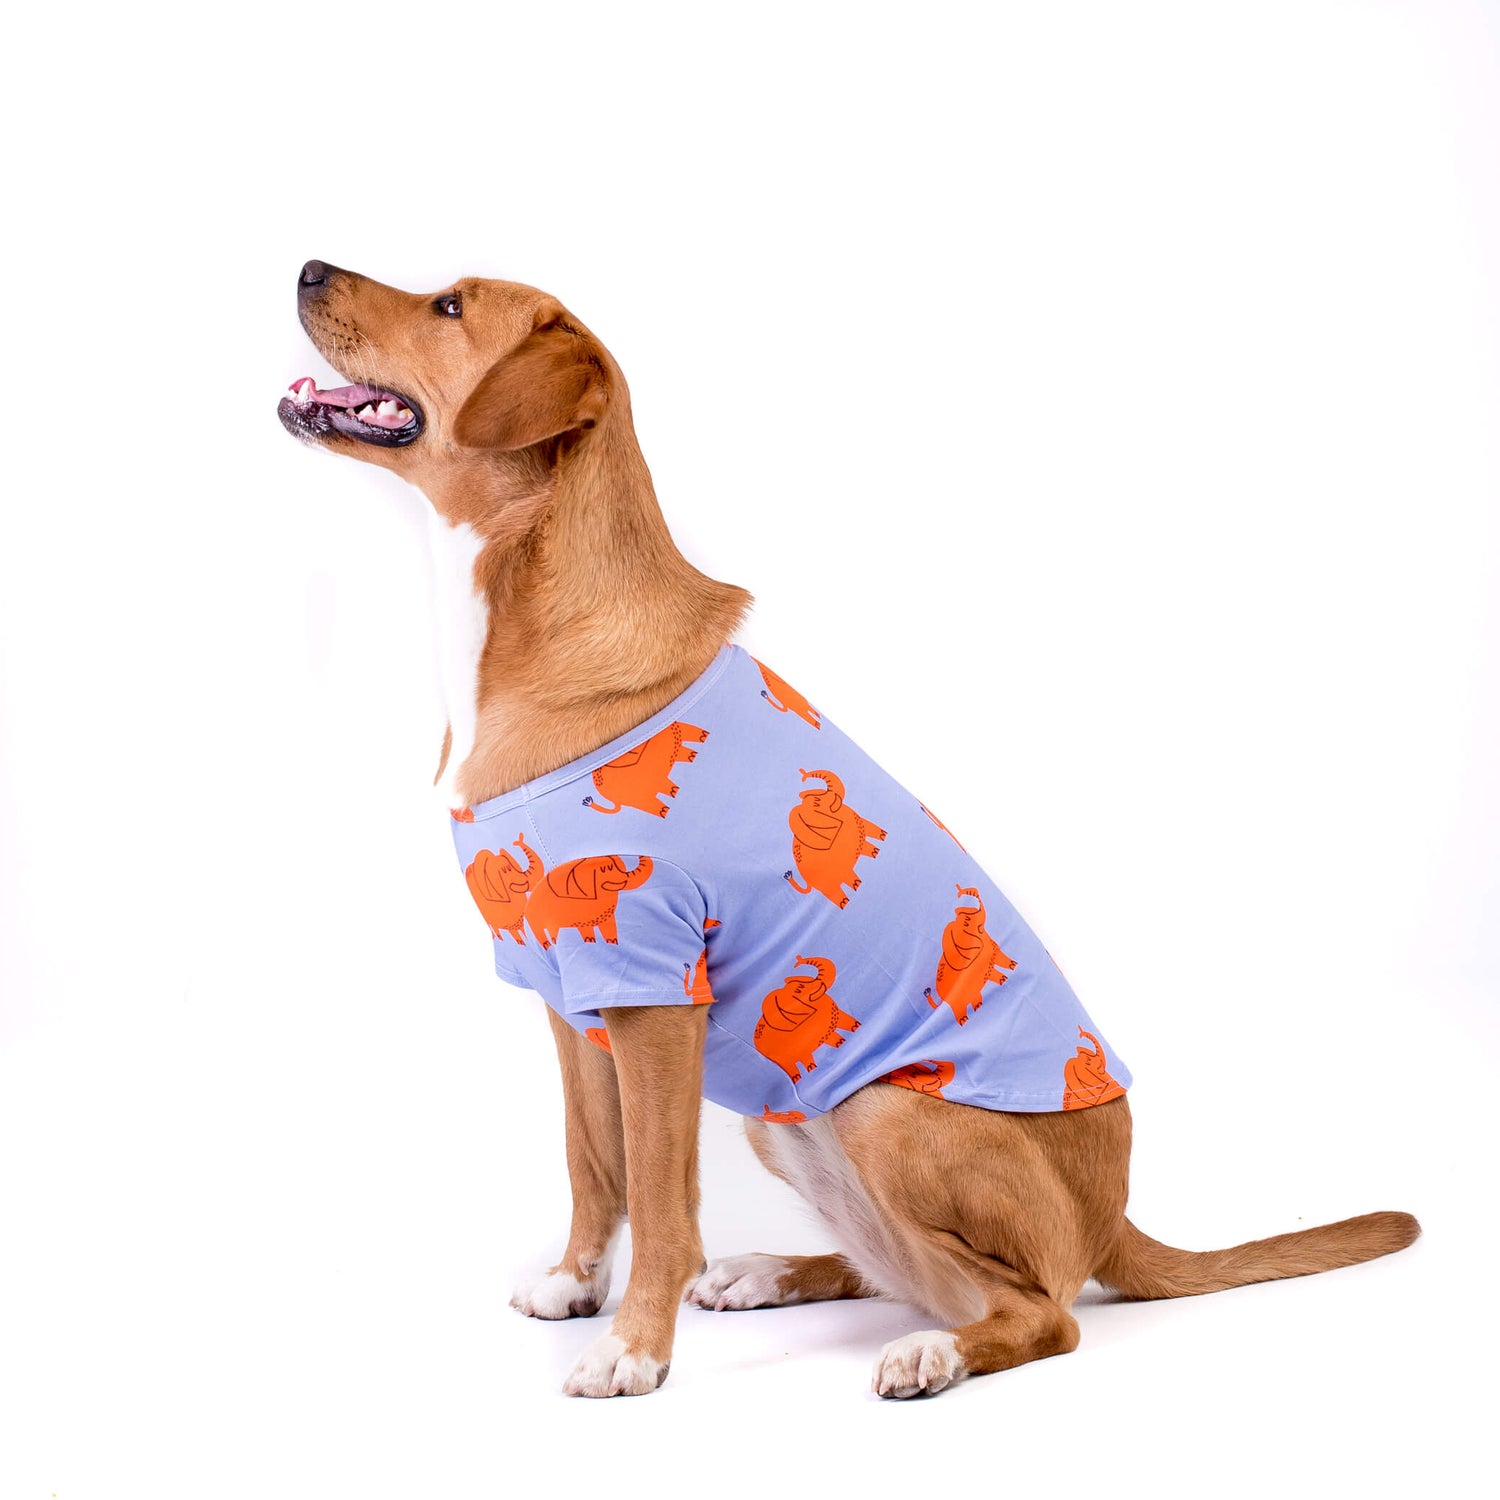 A Golden Retriever standing side onto the camera. It is wearing a Vibrant Hound Electric Elephant shirt for dogs. The shirt is lilac with Orange Elephants printed on it.